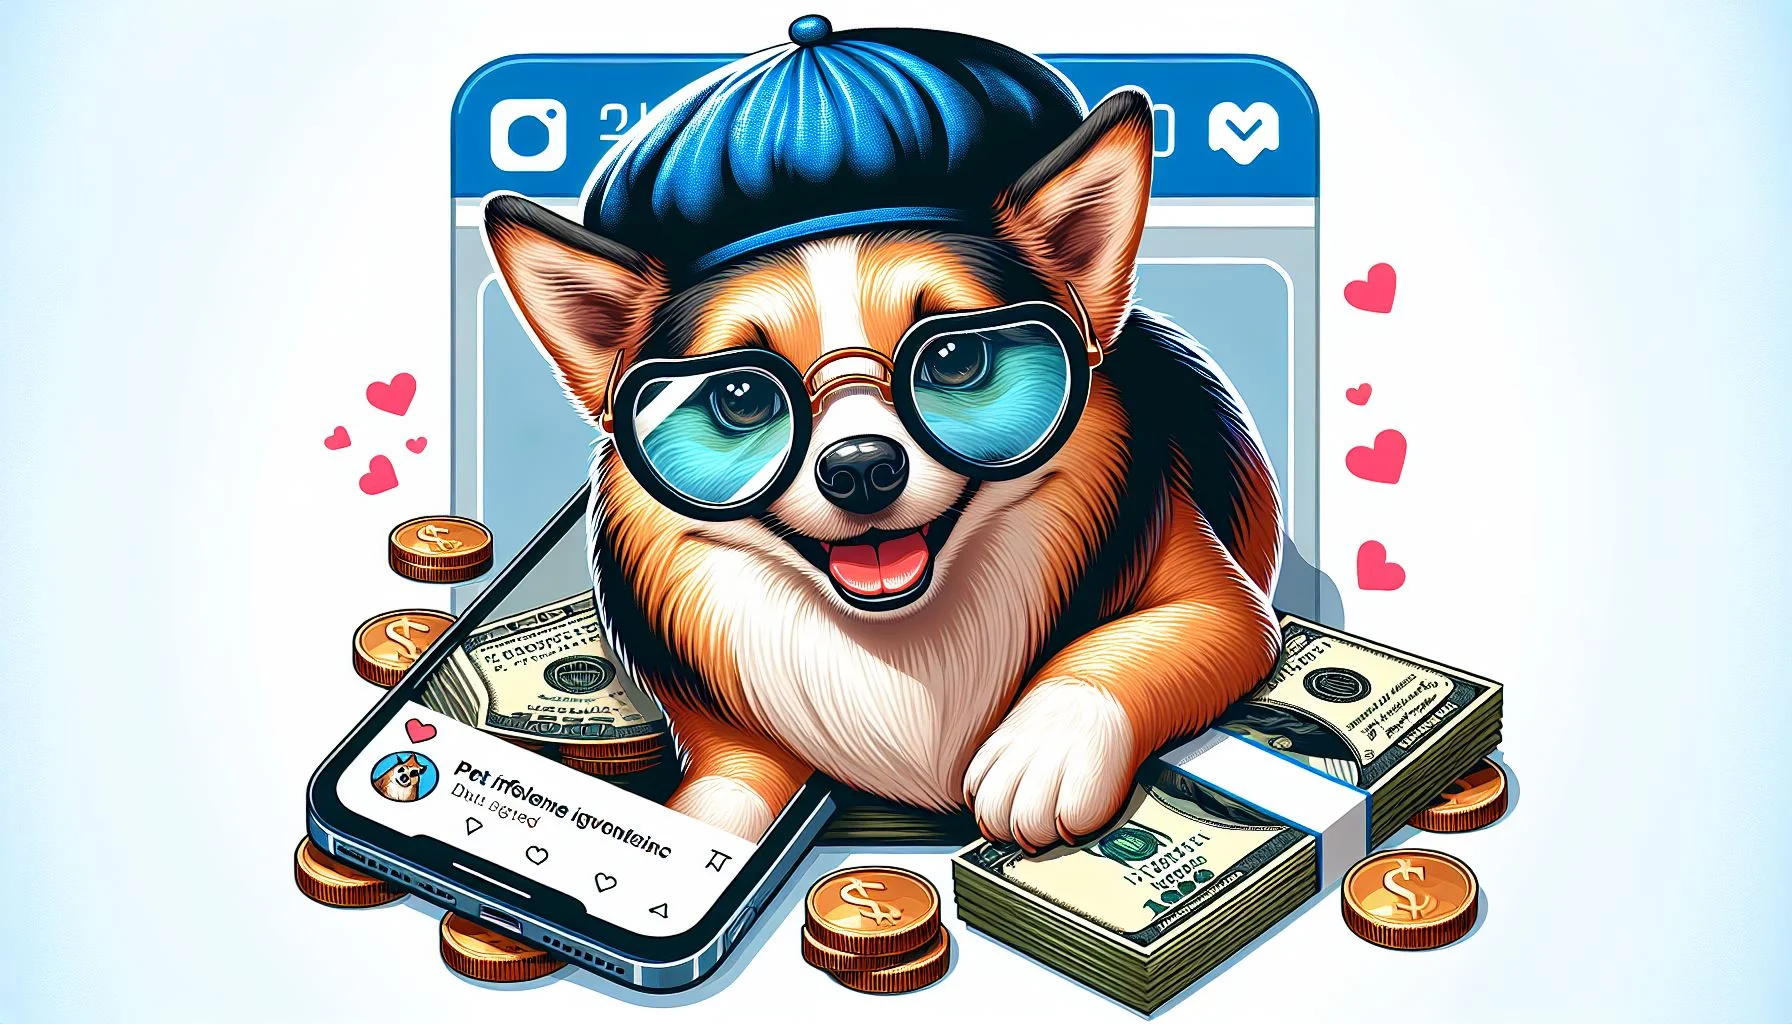 A pet influencer counting money earned from Instagram illustrated